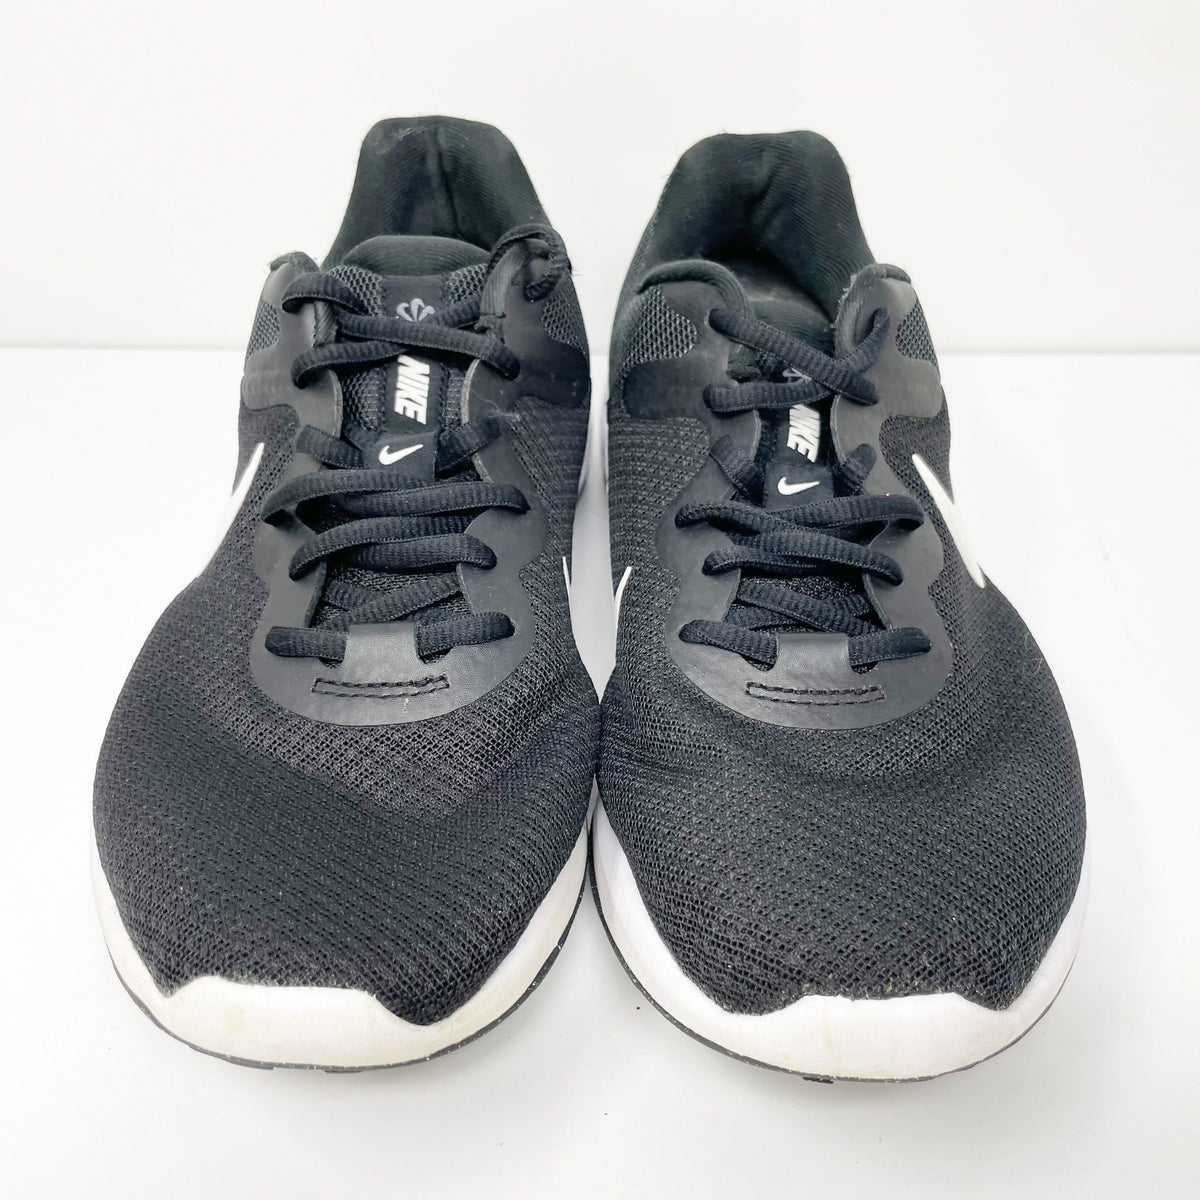 Nike Womens Revolution 6 DC3729-003 Black Running Shoes Sneakers Size ...